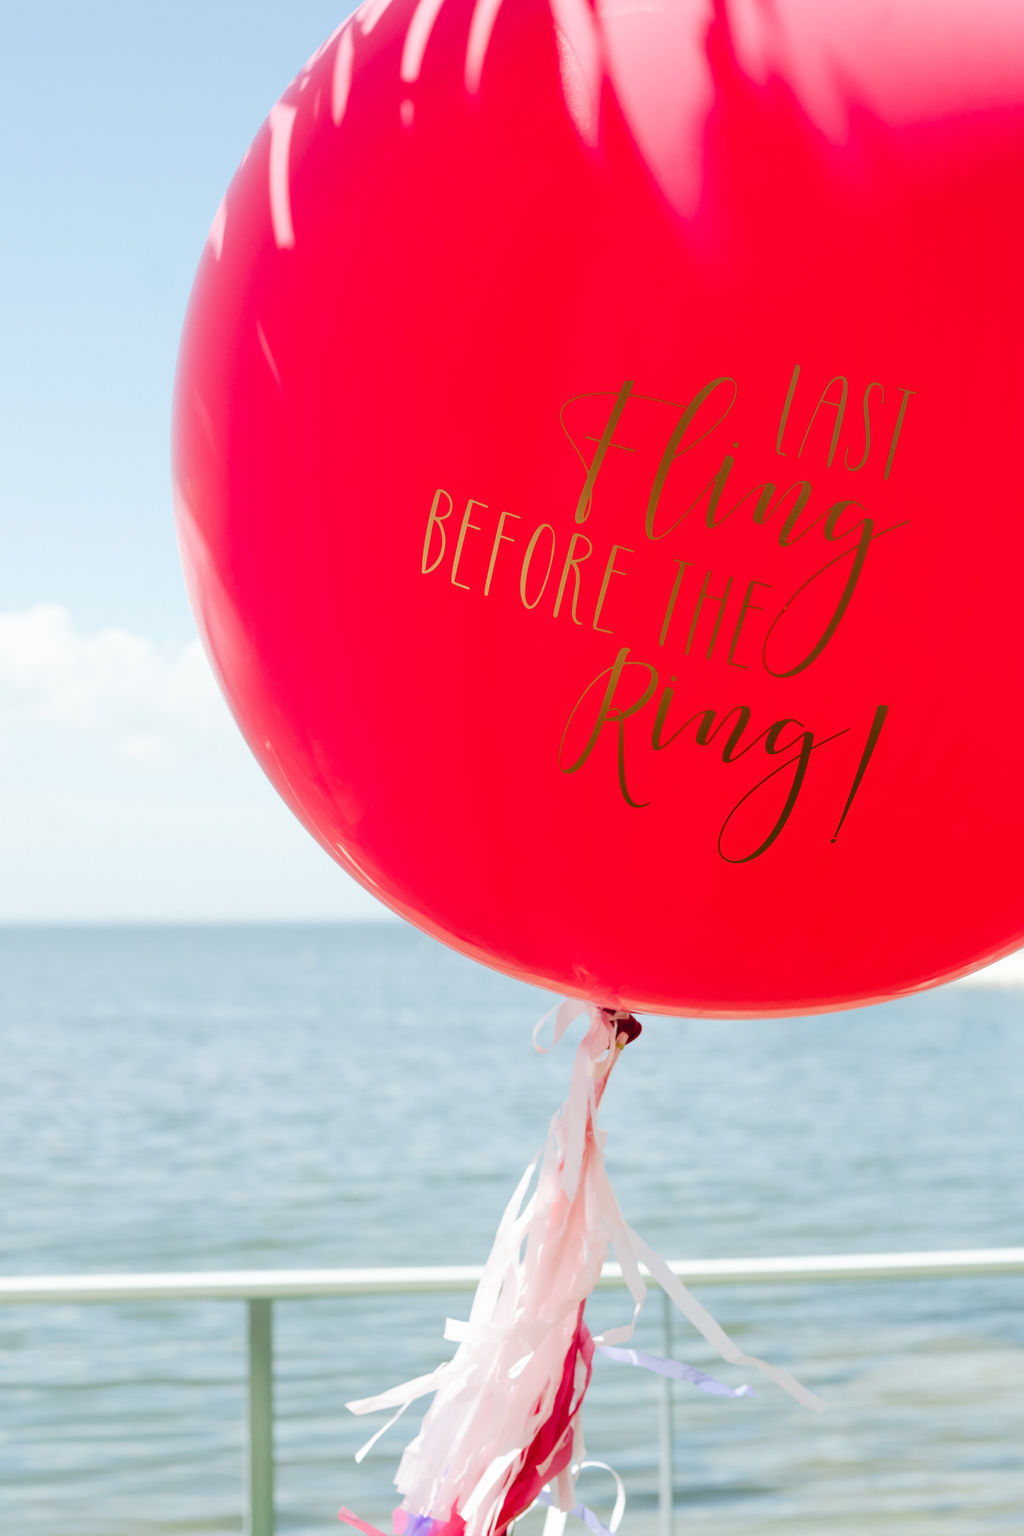 Custom Hot Pink Round Balloon with Quote in Gold and White Tassle for Bachelorette Party | Tampa Bay Photographer Grind and Press Photography